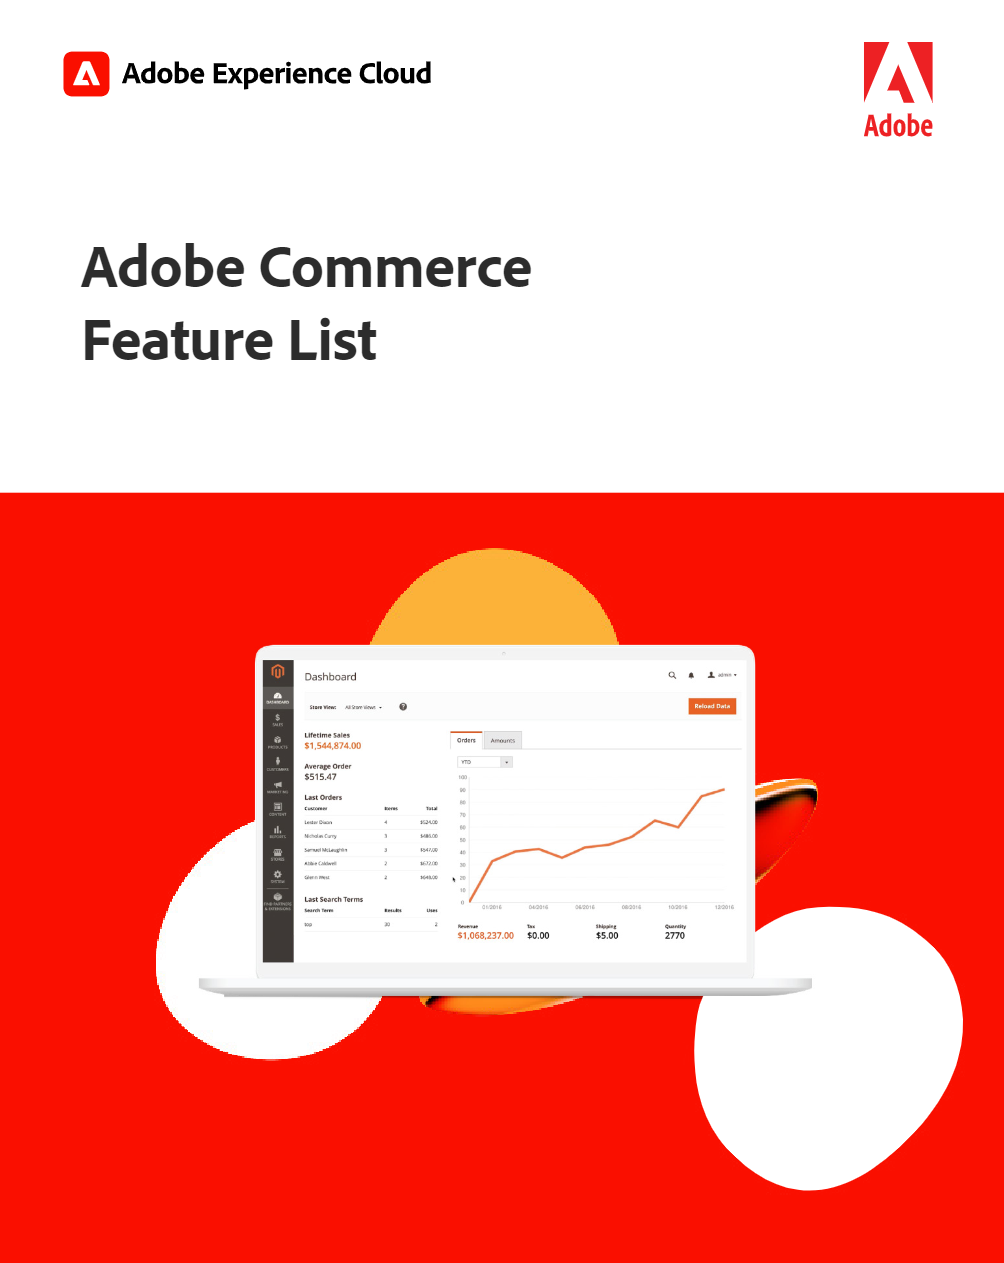 >Adobe Commerce Features List